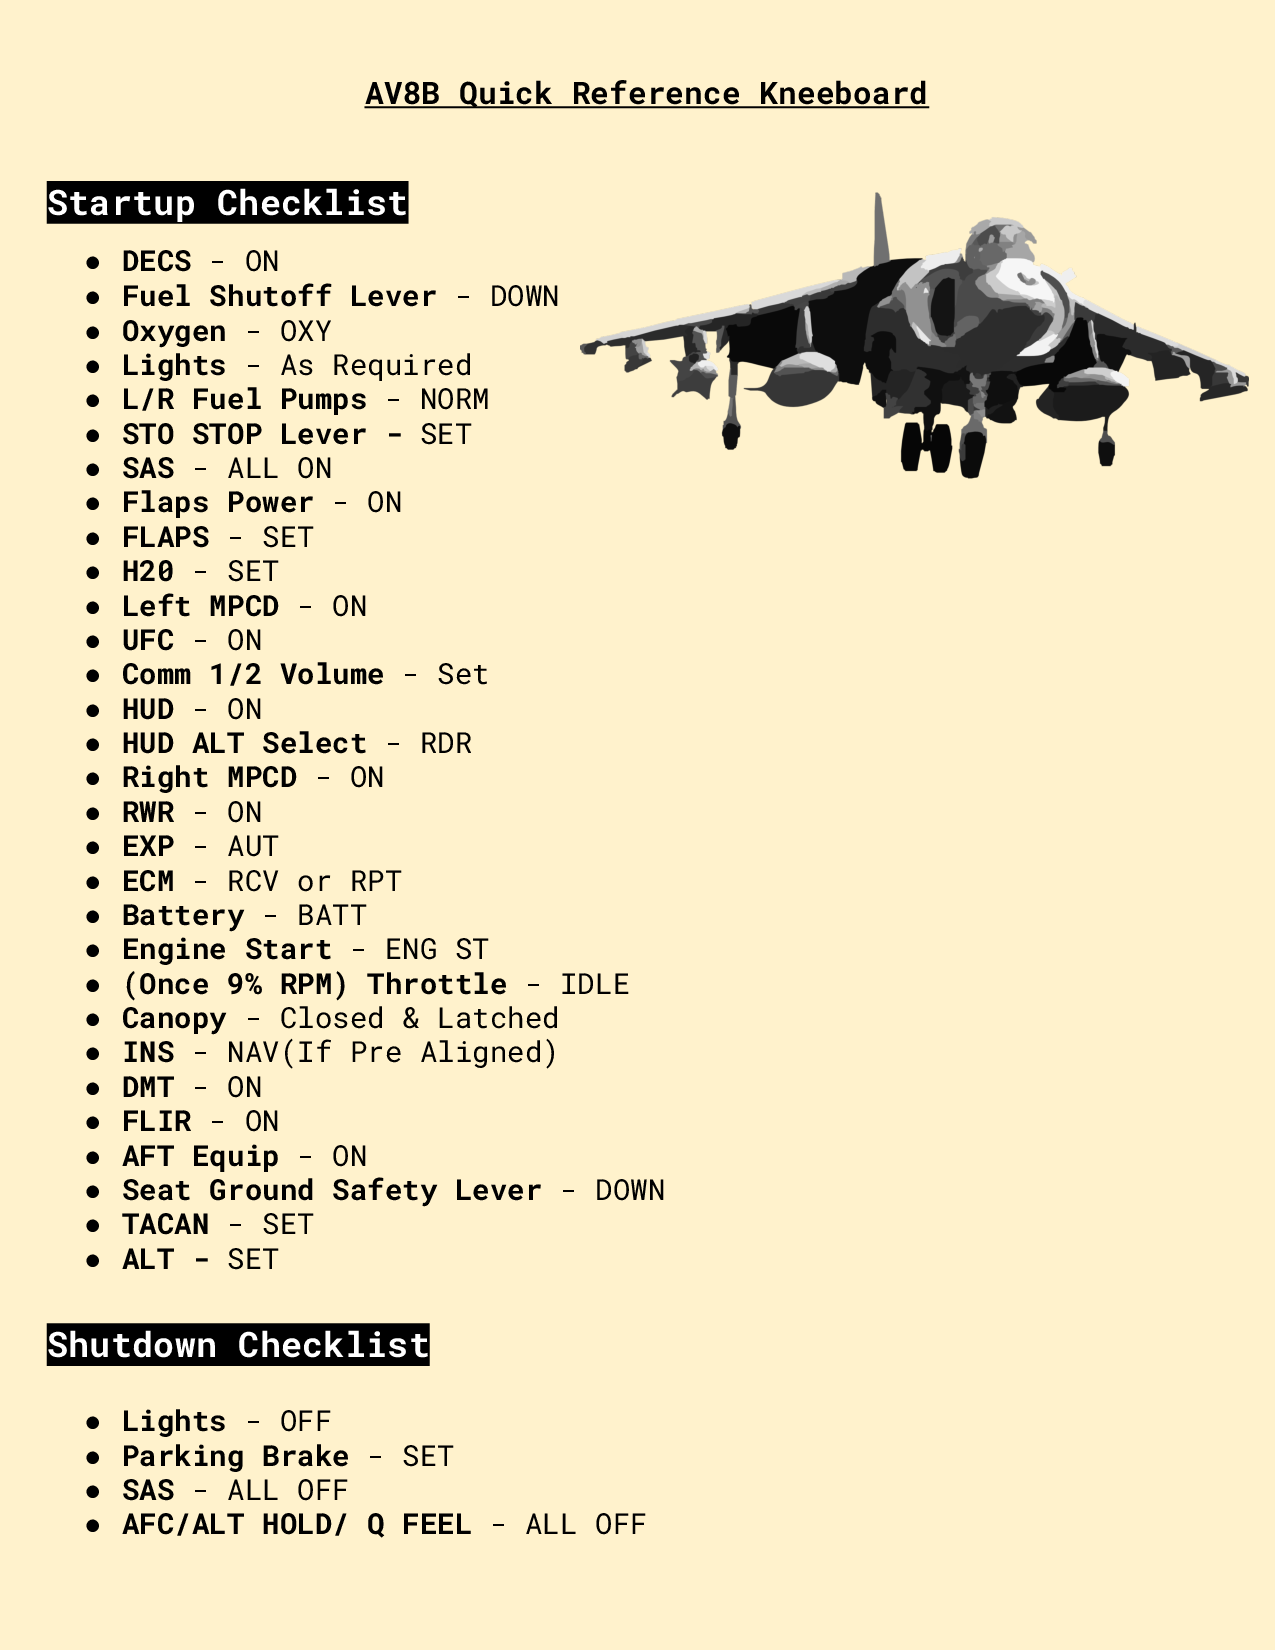 AV8B Harrier Quick Reference Kneeboard and Checklists By: Hayden